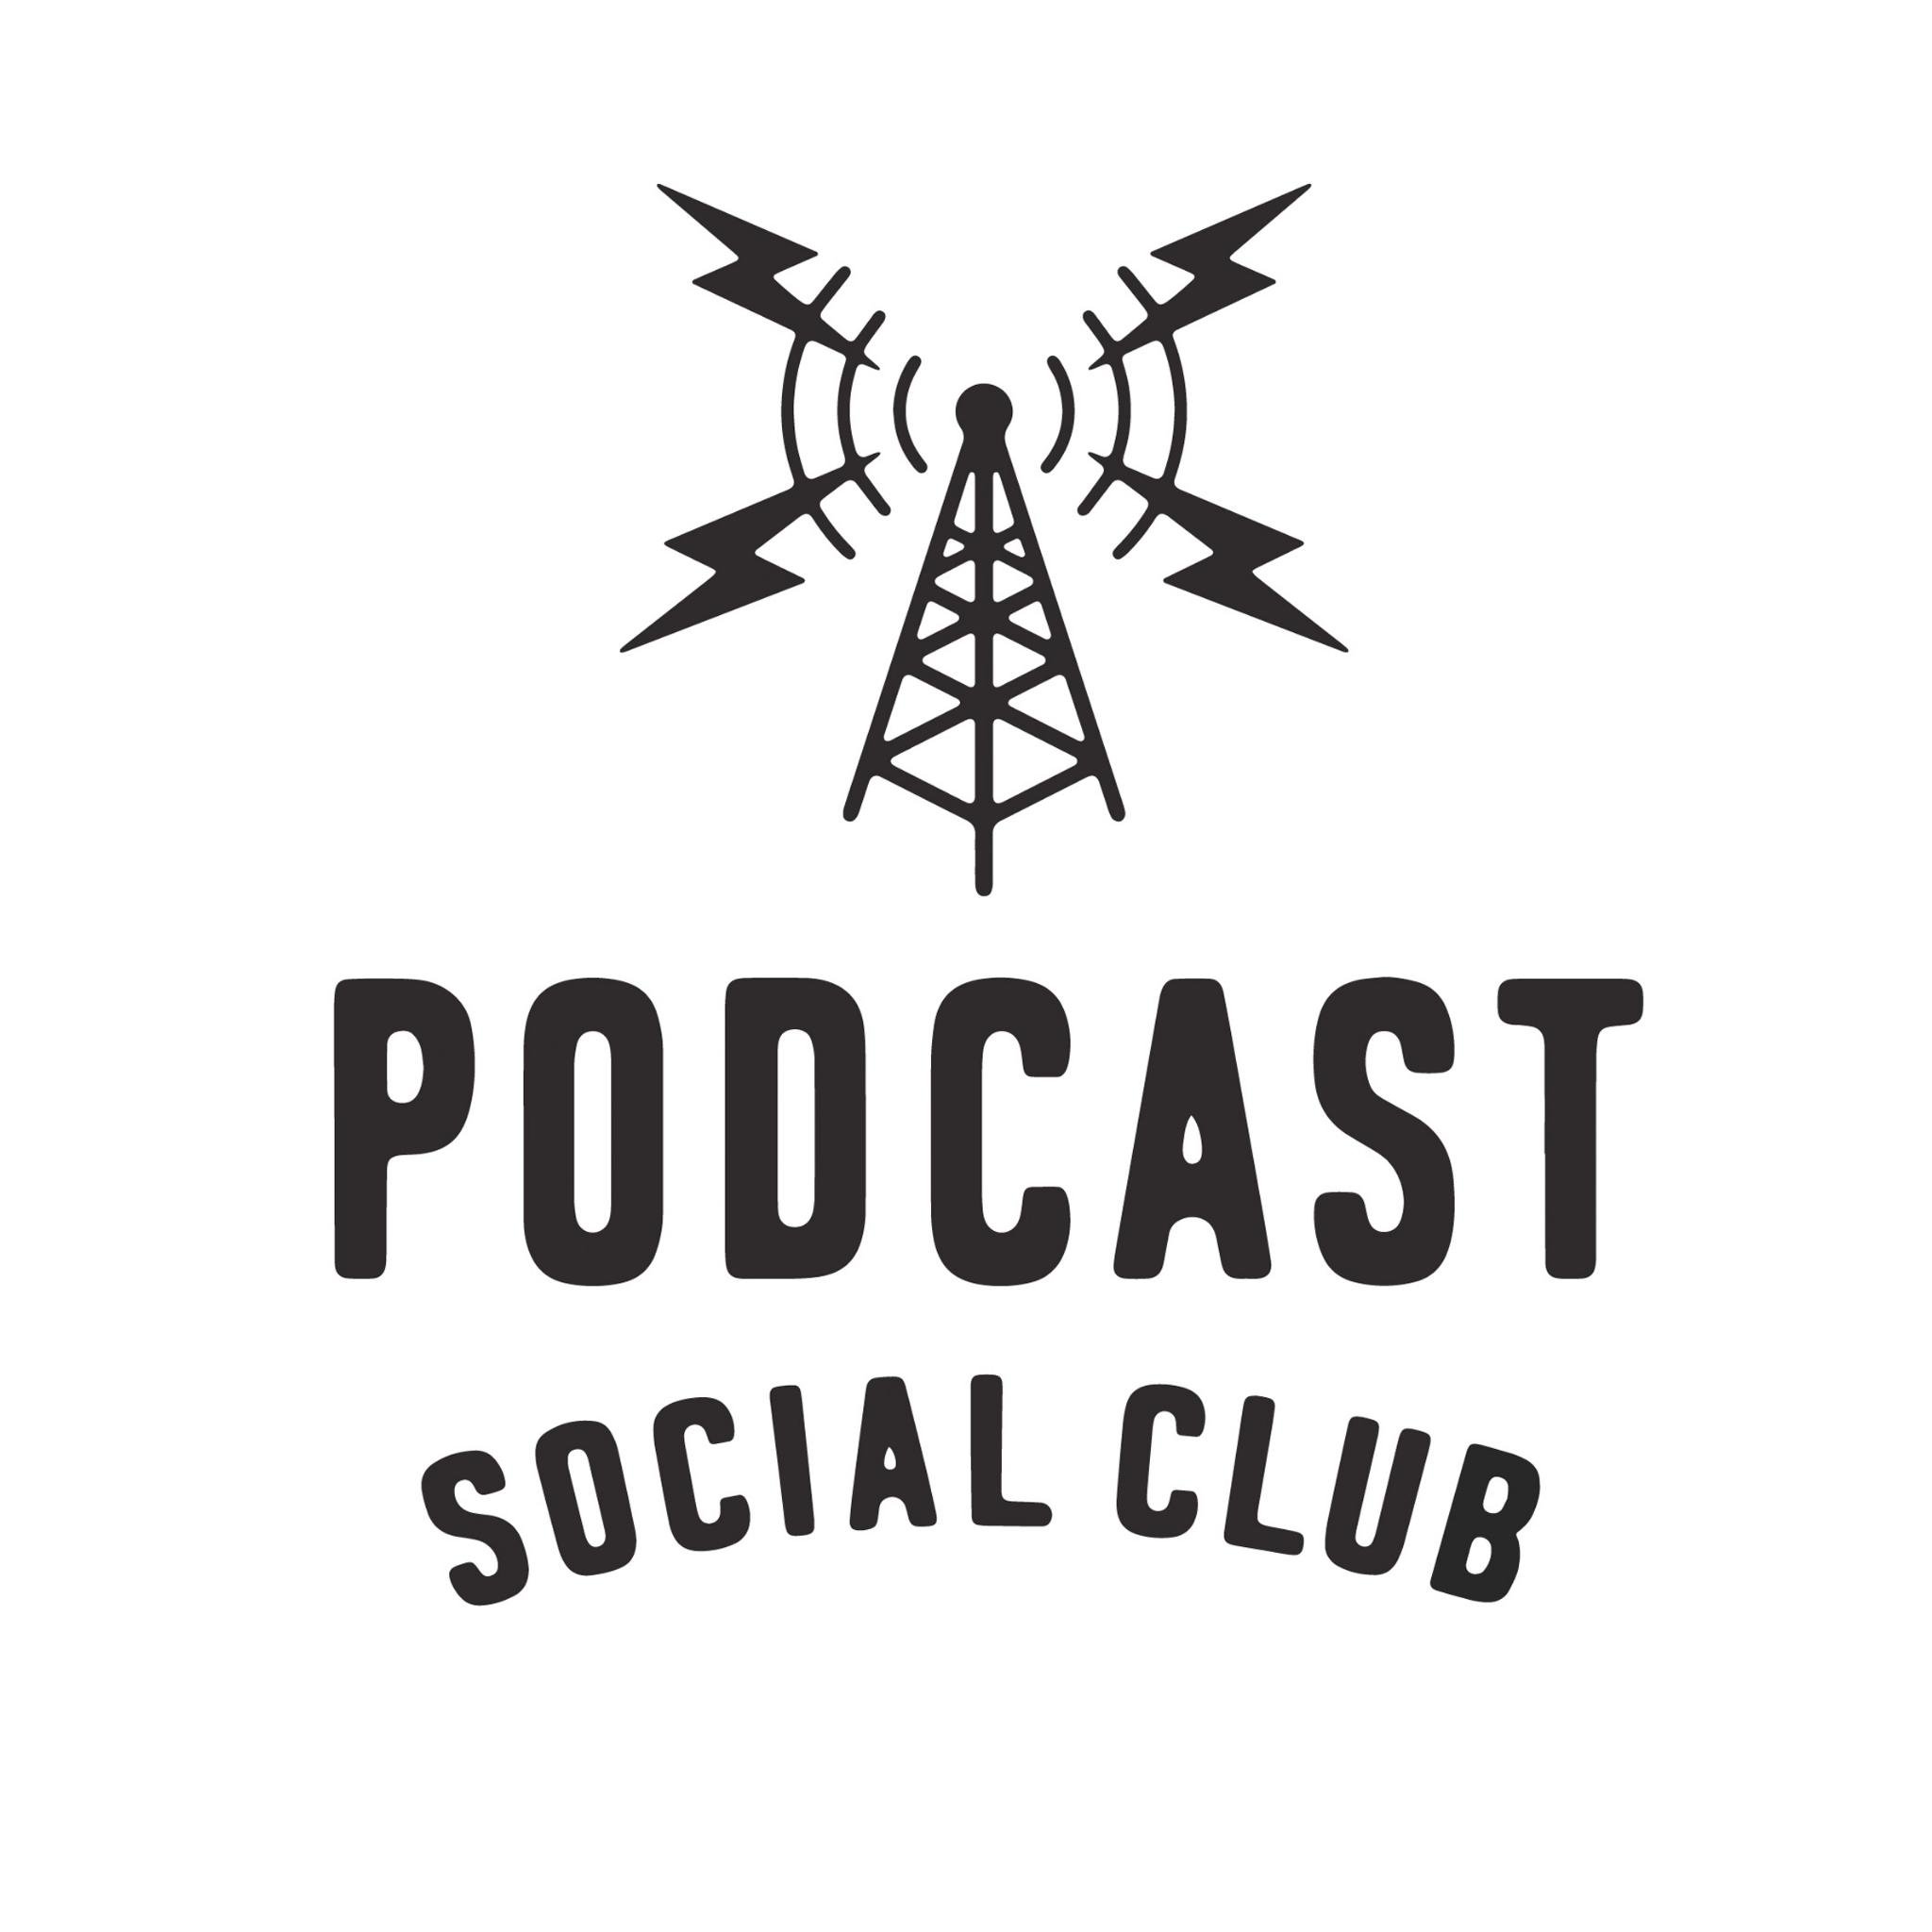 🗣 Be part of the audience in the recording of live podcasts. Whatever your passion, we'll have a pod on it. #PodcastSocial 🎙